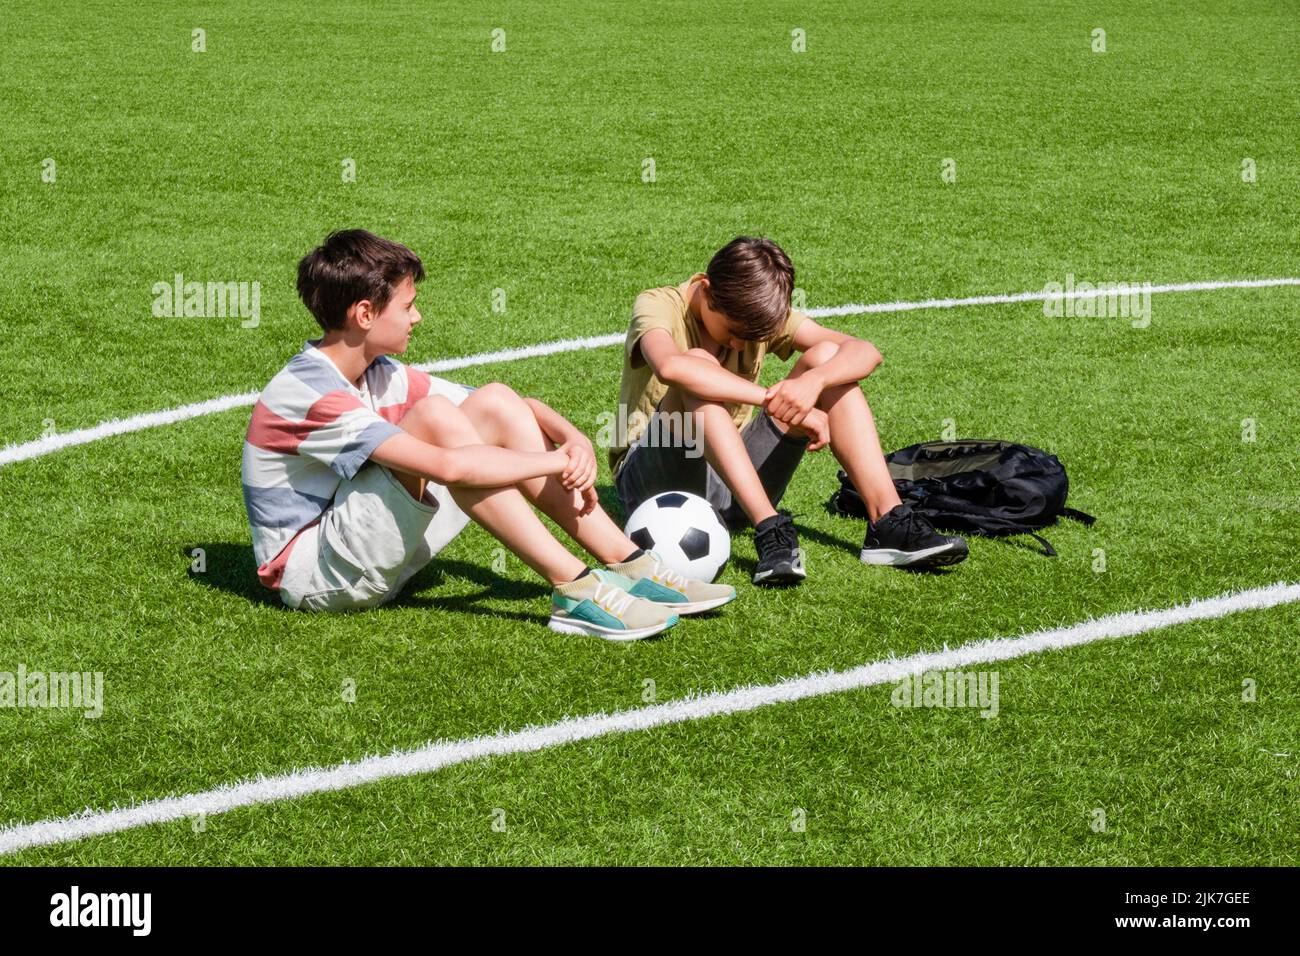 Teenage boy comforting consoling upset sad friend in school stadium. Education, bullying, conflict, social relations, problems at school, learning Stock Photo